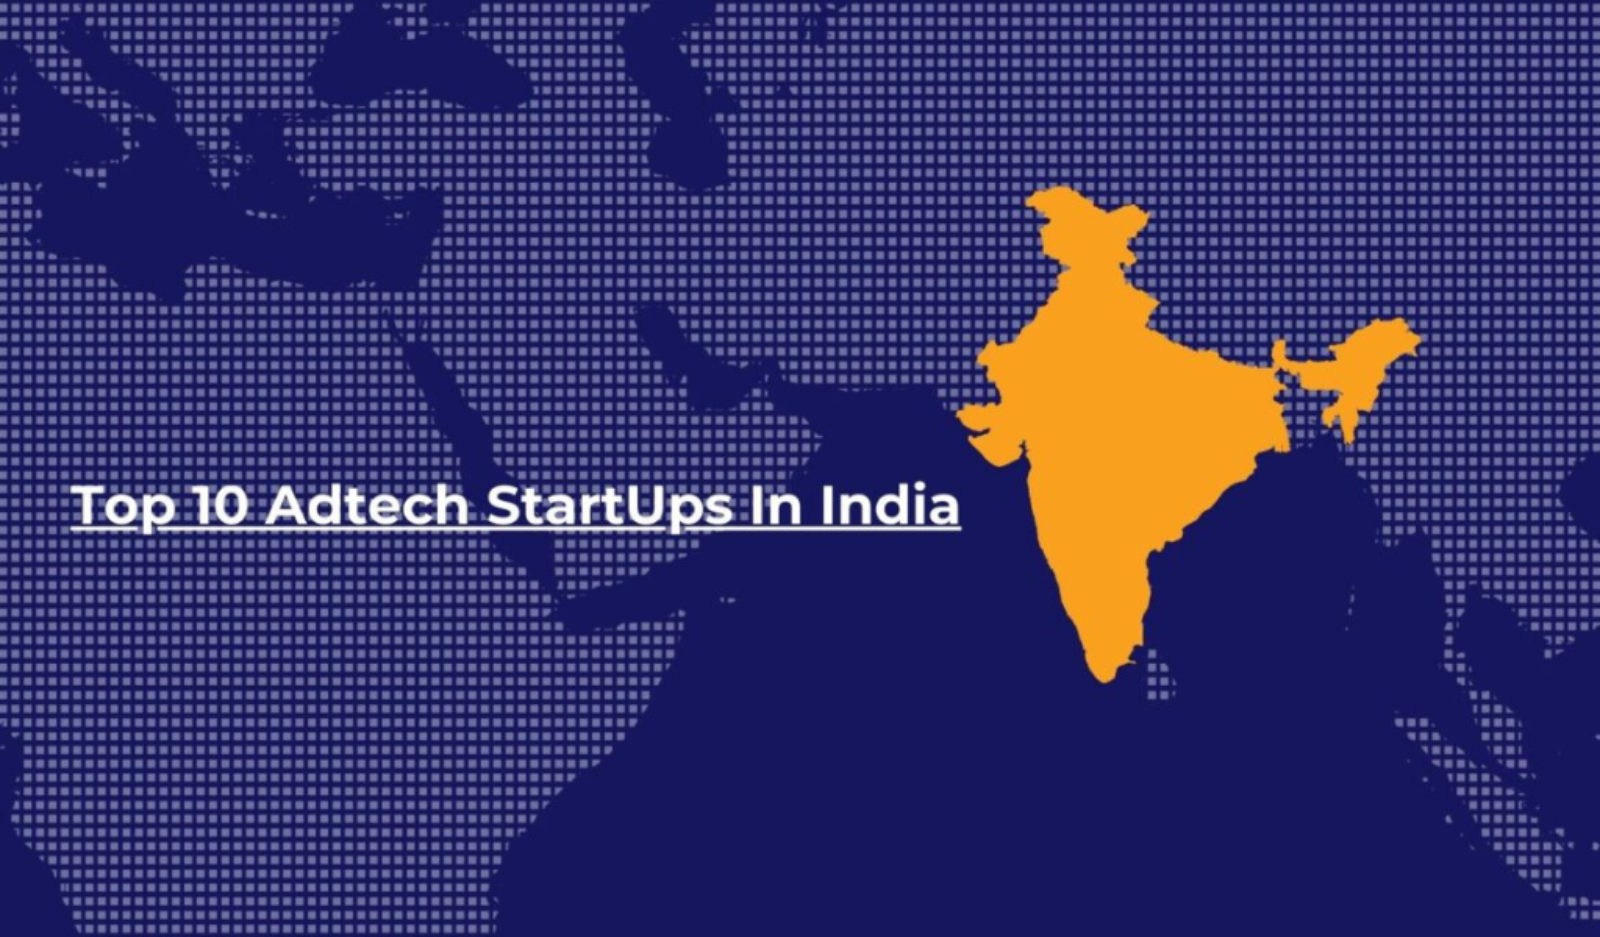 Top 10 Emerging Indian Ad Tech Startups You Should Know About